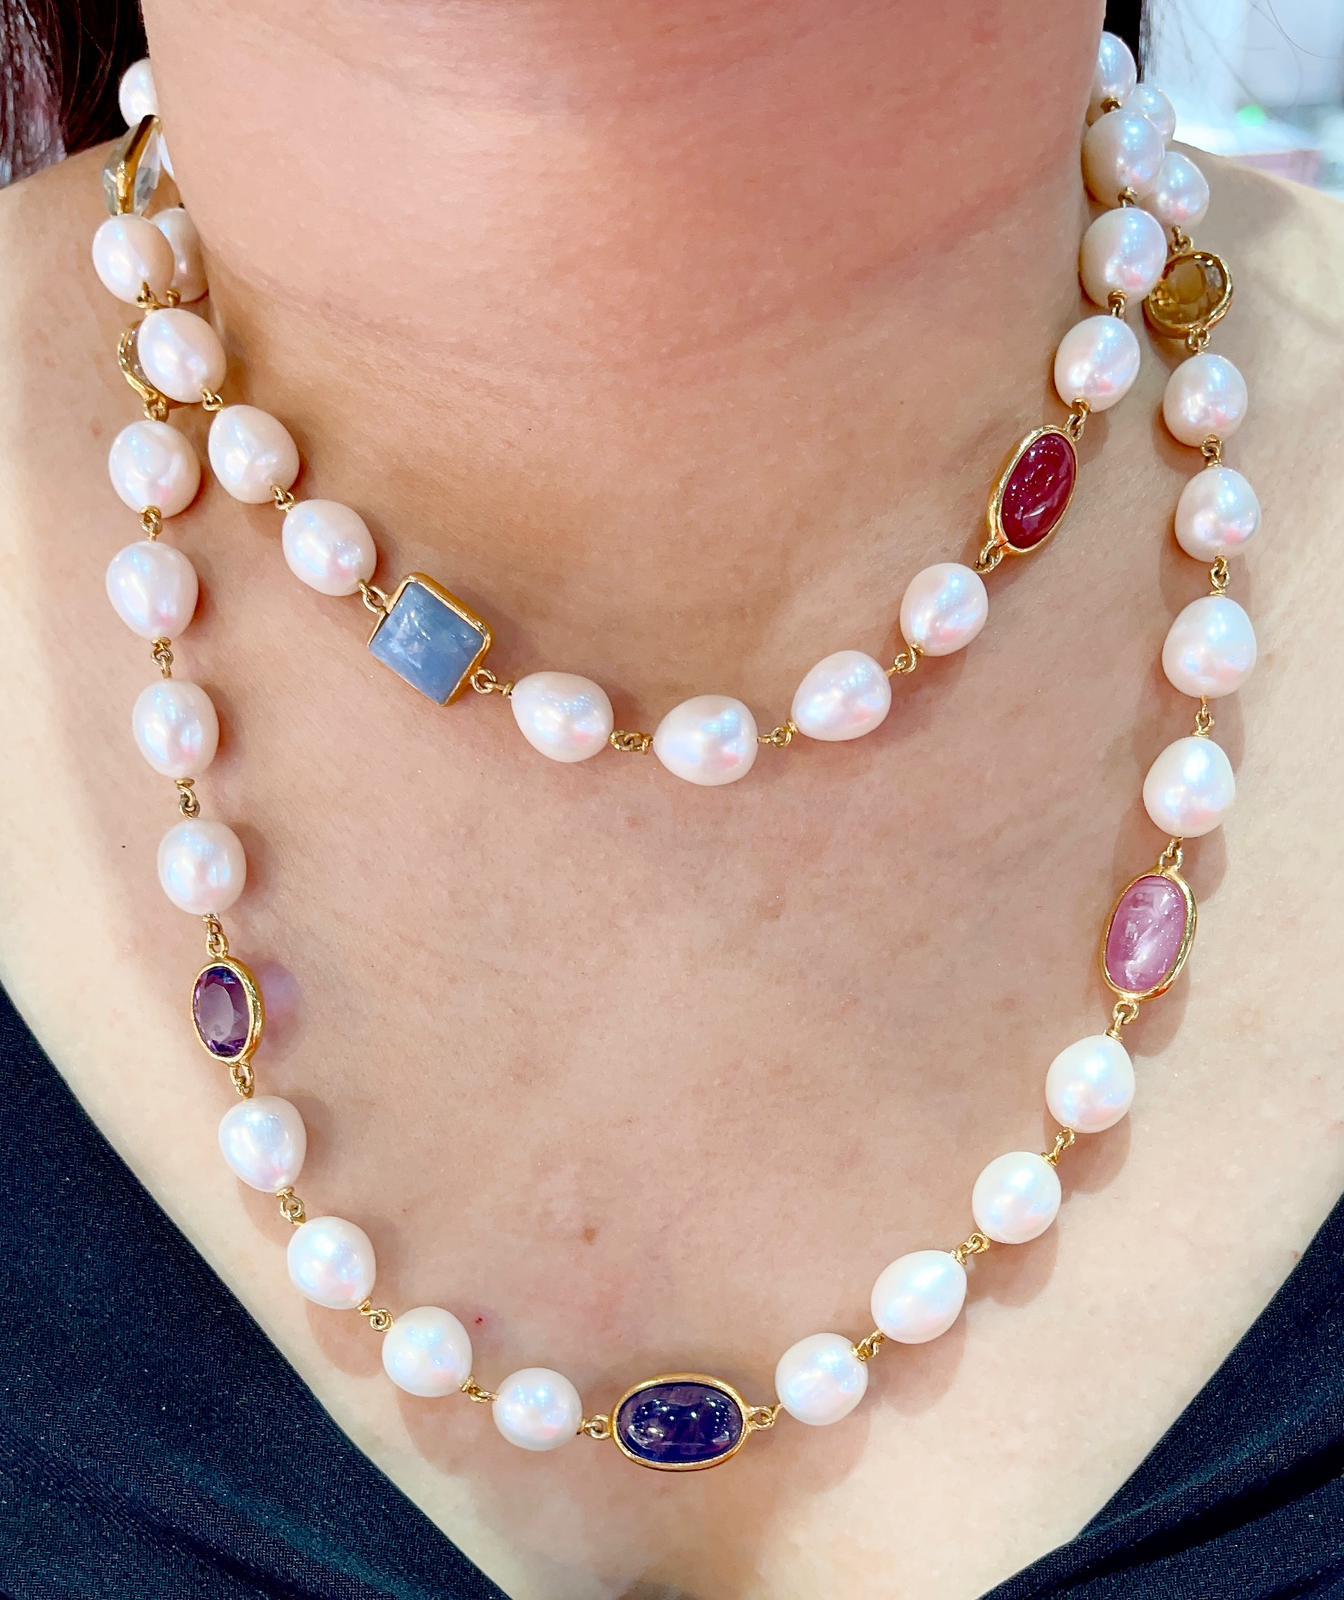 Bochic “Capri” Necklace, Gems & South Sea Pearls Set in 22 Gold & Silver In New Condition For Sale In New York, NY